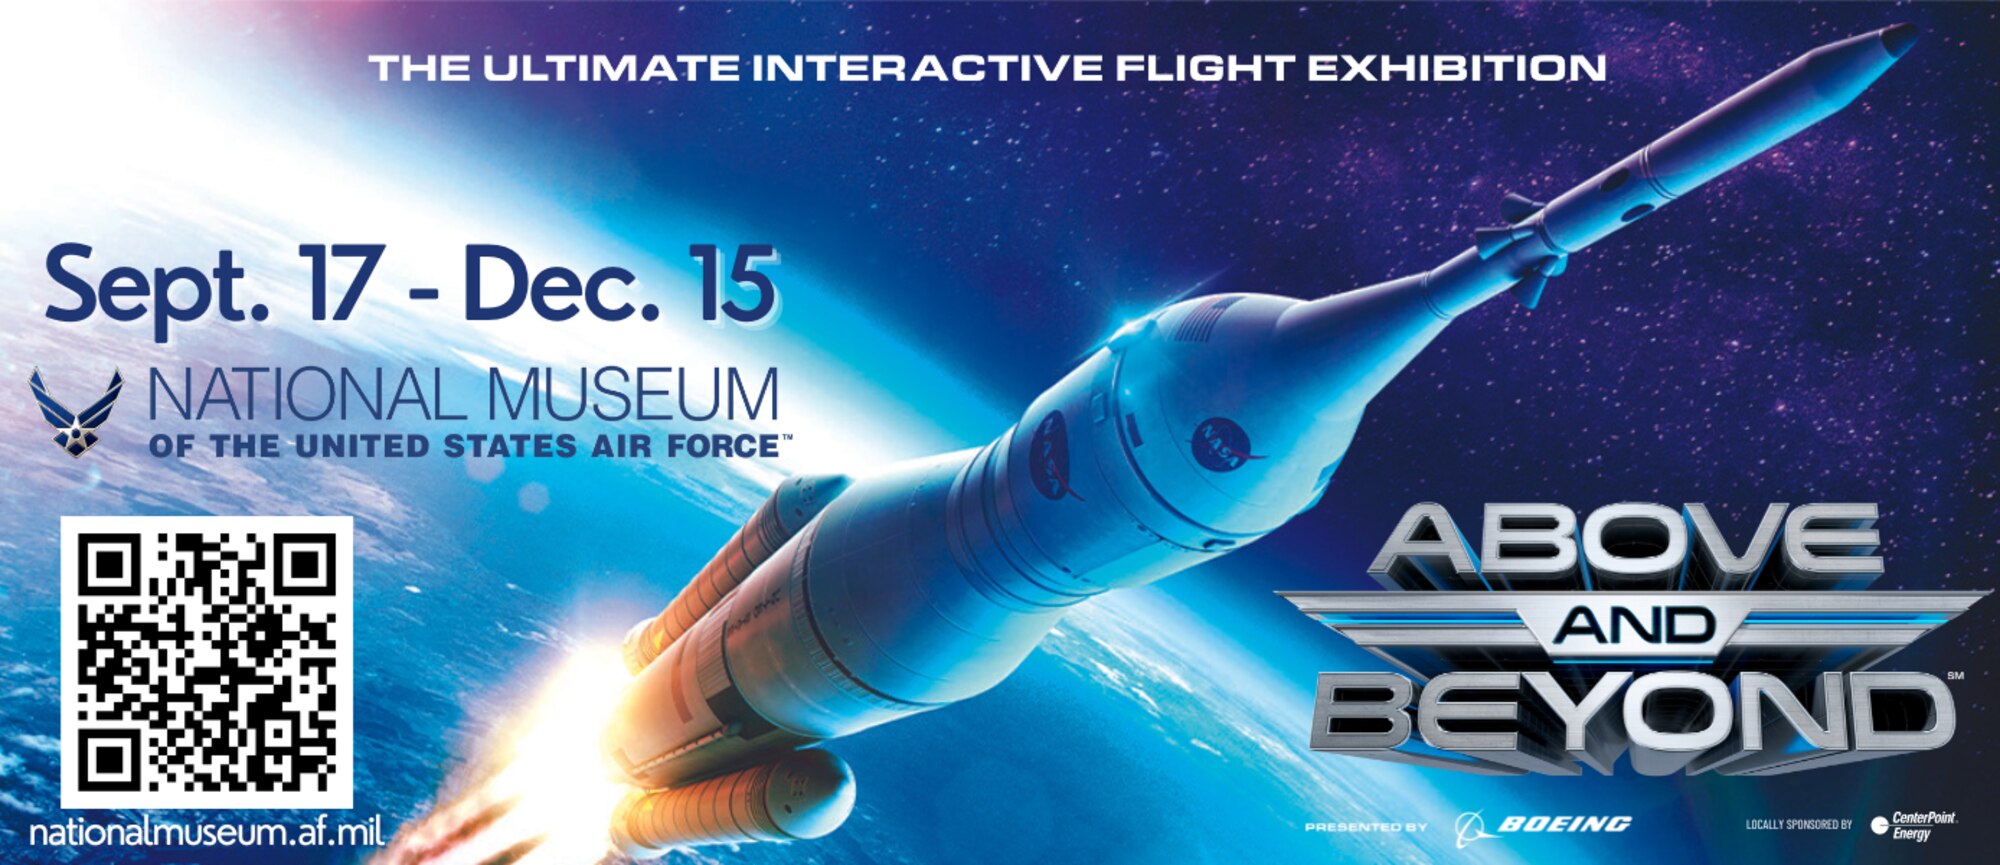 Image of a futuristic rocket in space with the text Above and Beyond, the museum logo and dates Sept. 17-Dec 15.